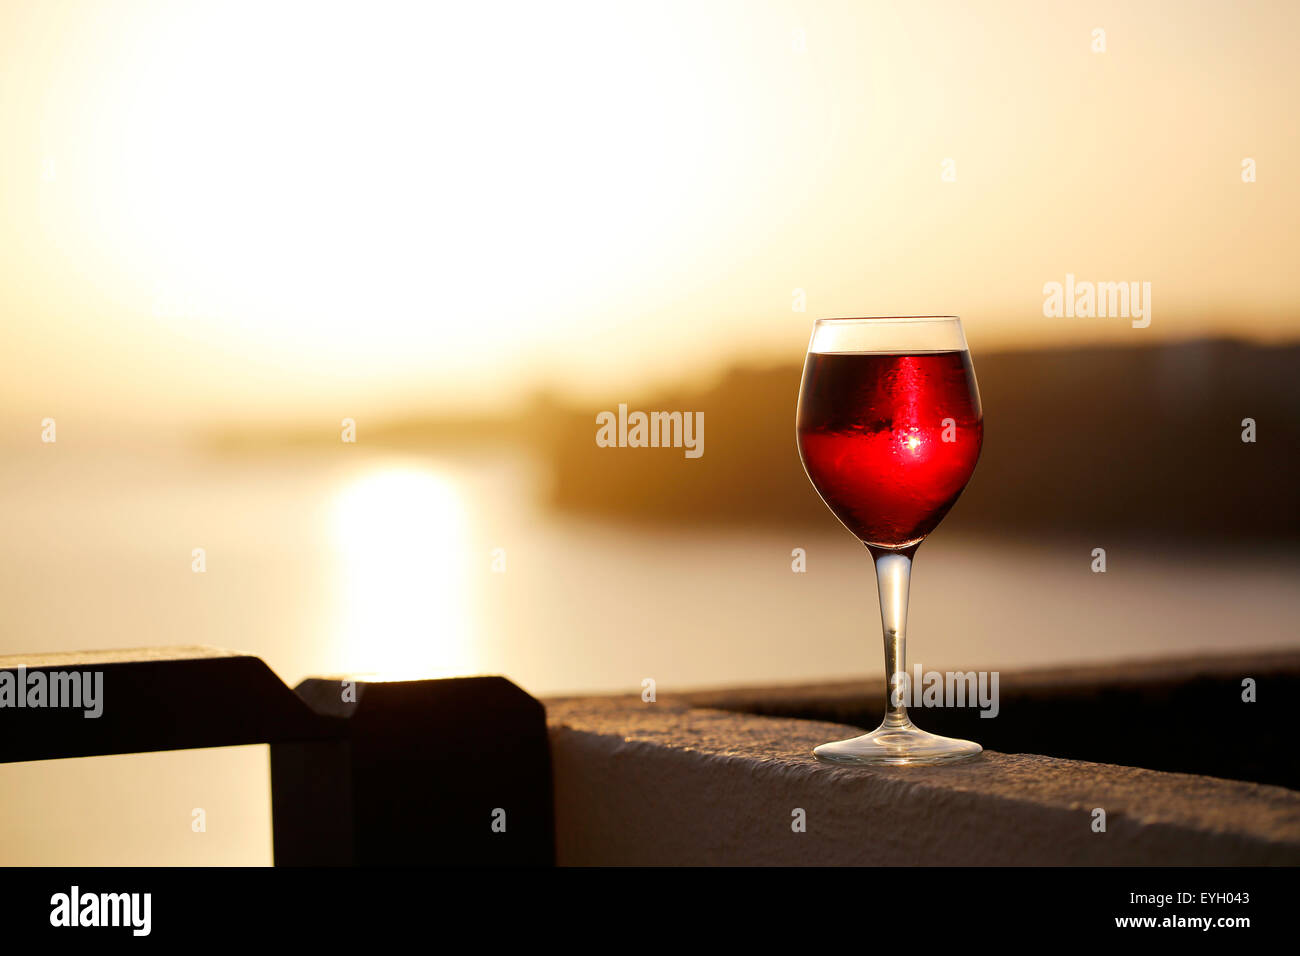 A glass of red wine on a balcony at dusk with a sunset in the background. taken in a holiday resort in Lanzarote Spain. Stock Photo